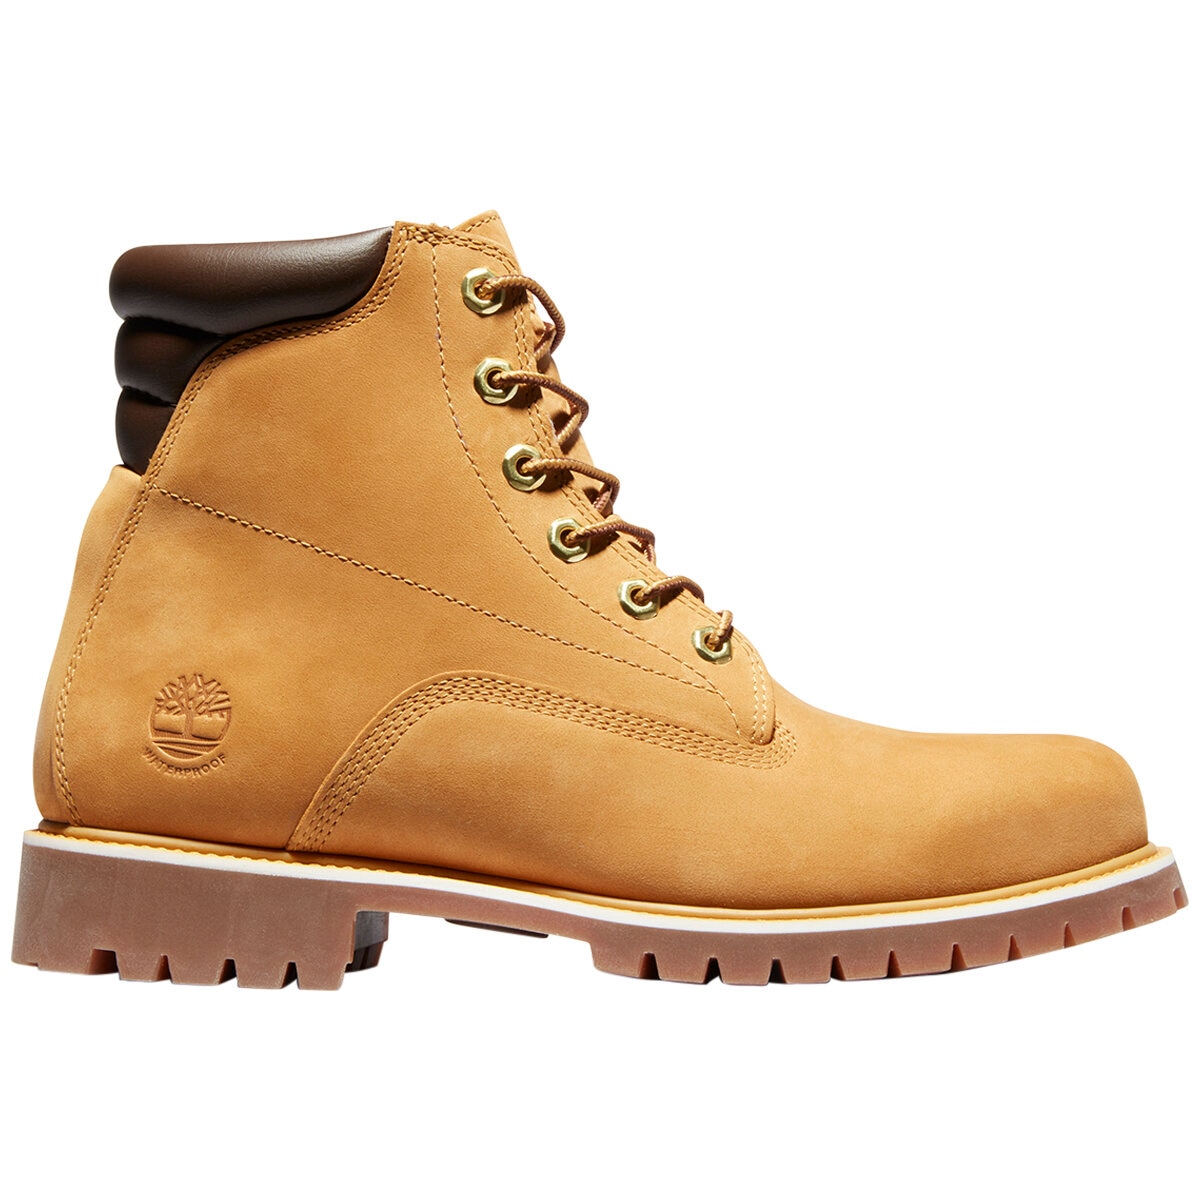 Timberland Boots Style: How To Wear Timberland Boots In 2023 | vlr.eng.br